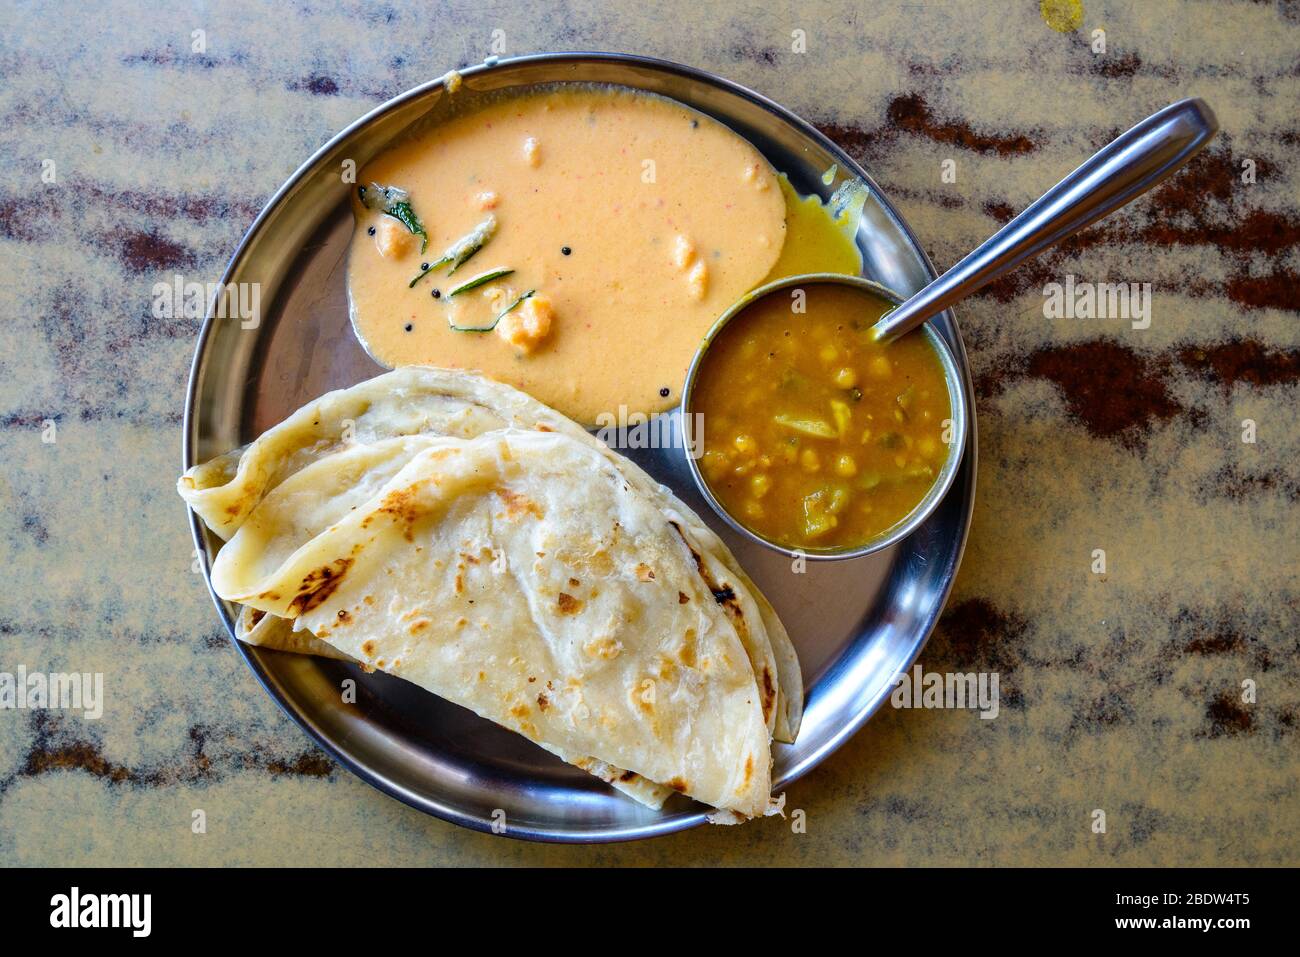 Cheap and plain meal of the Indian in all India, Roti sabji Stock Photo